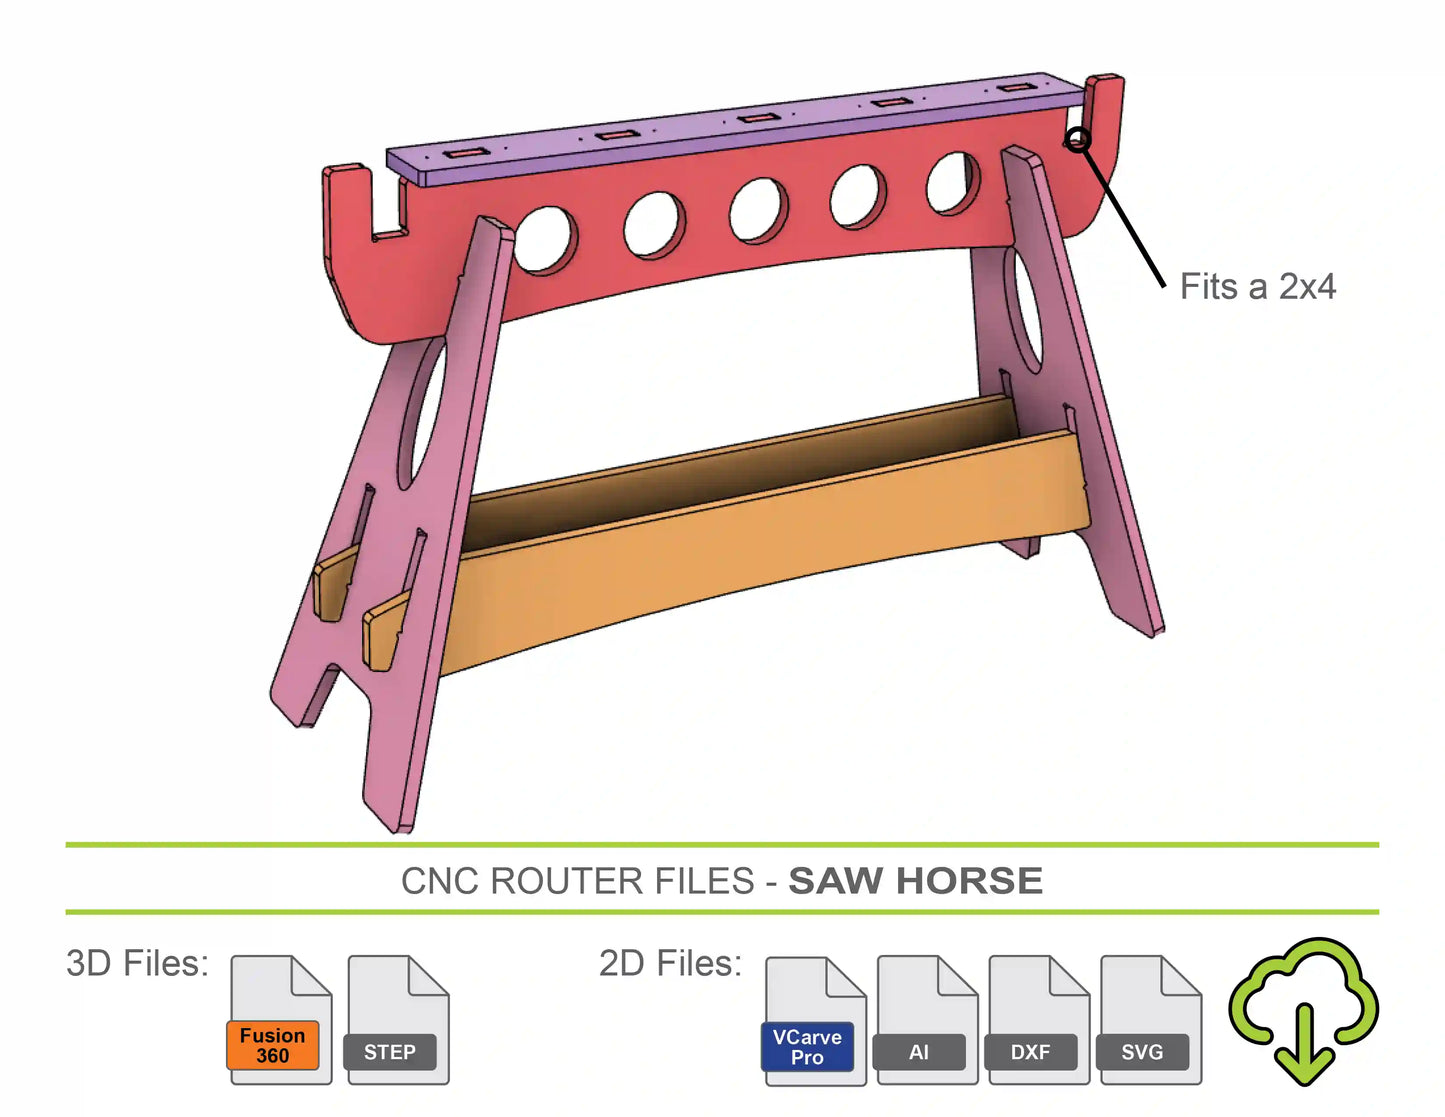 3d model of plywood sawhorses to cut out from cnc wood router files on a shapeoko cnc in a garage